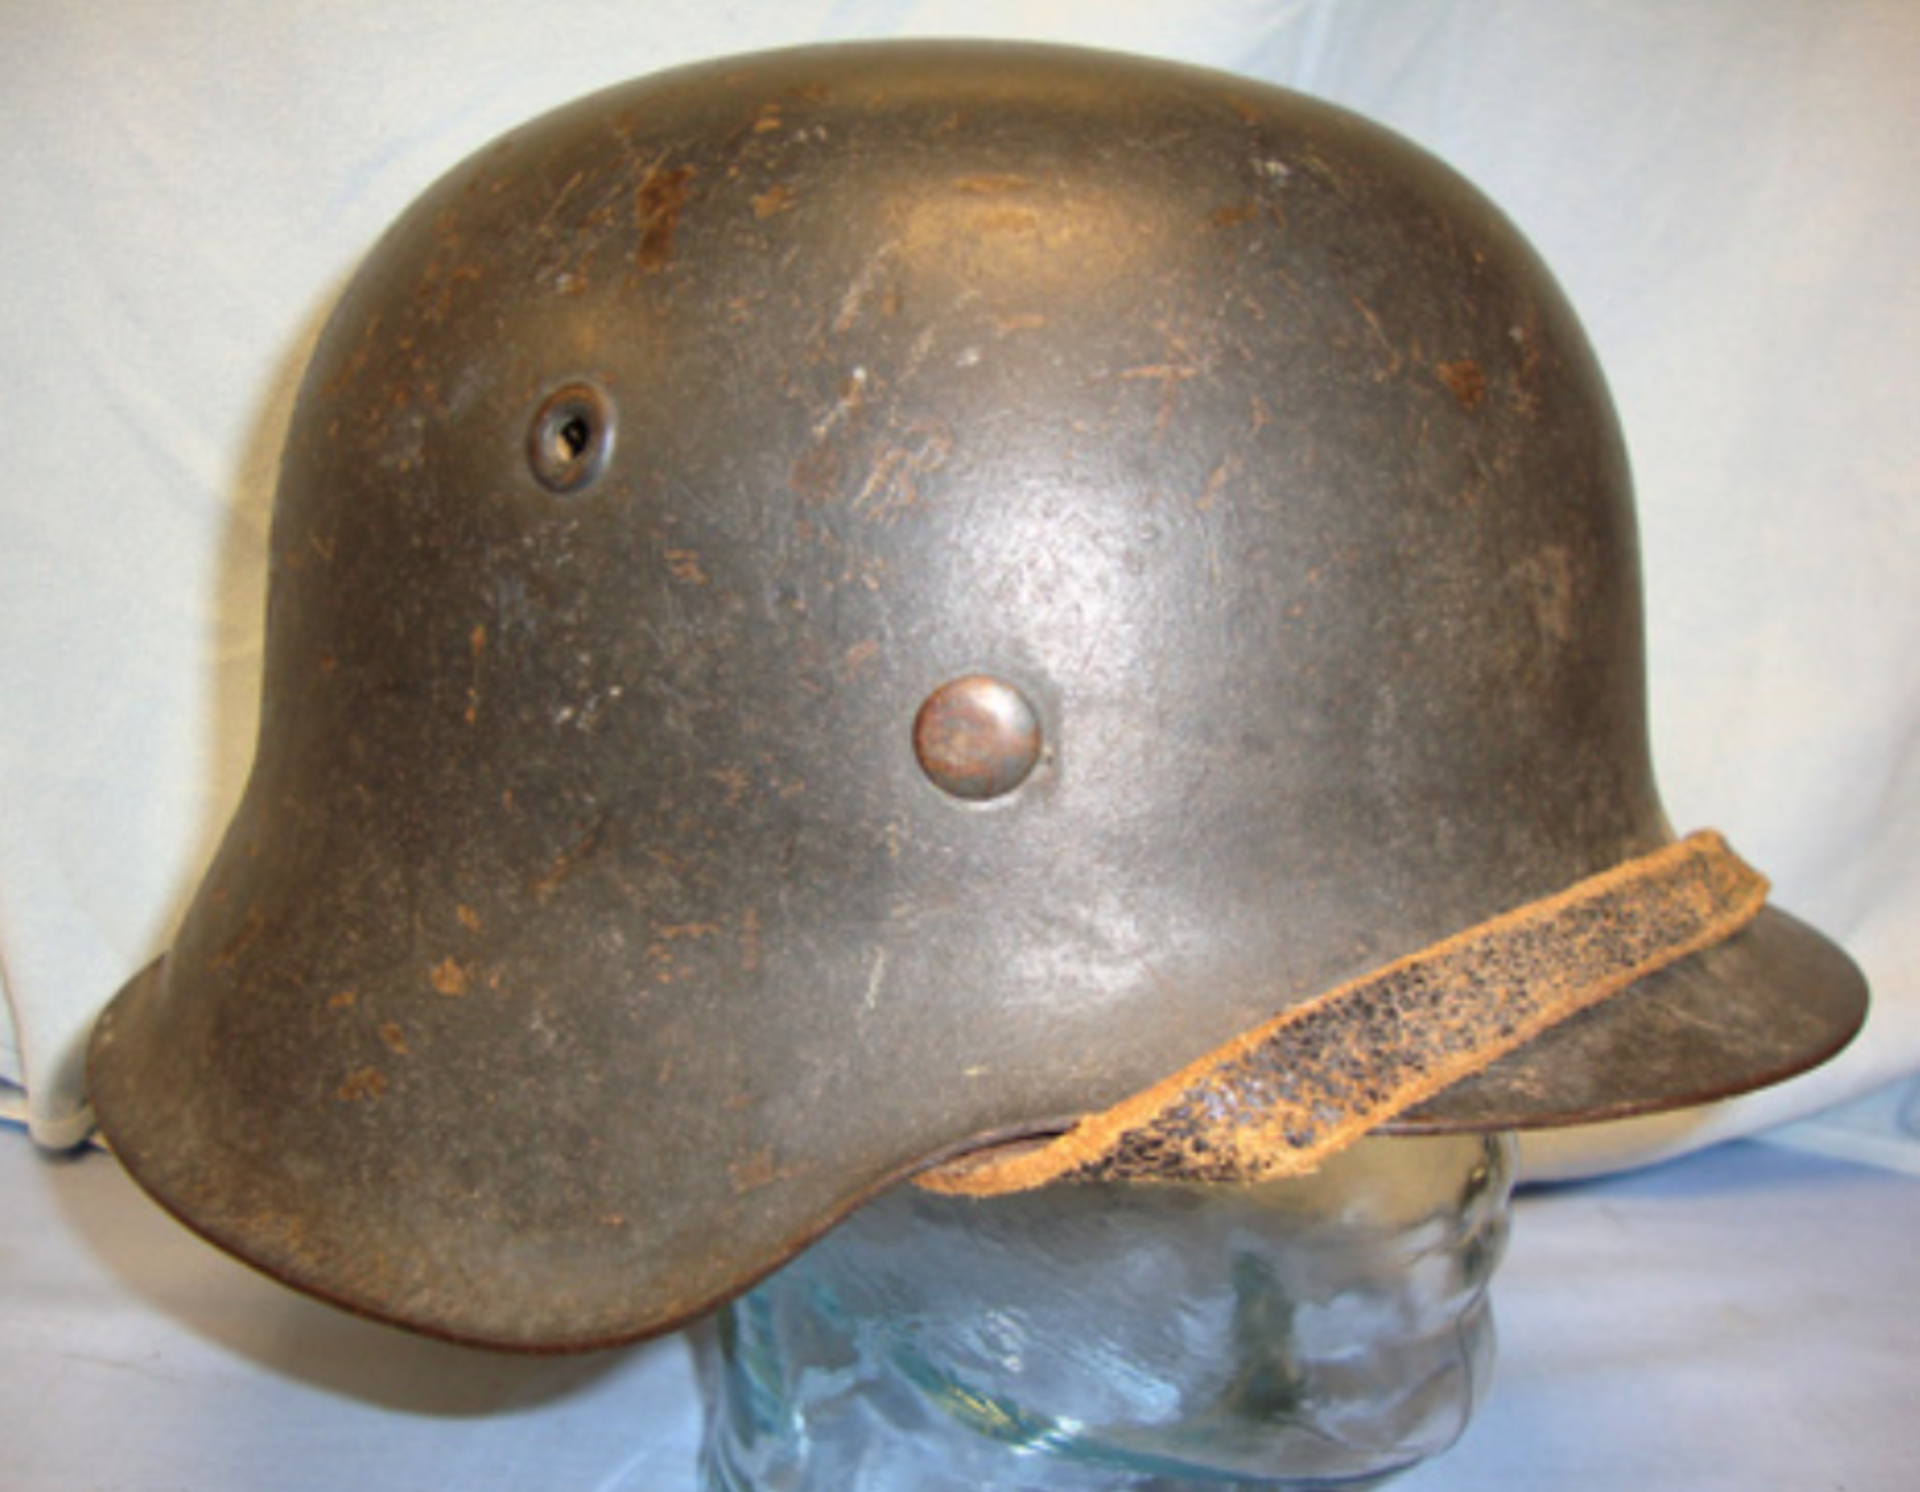 WW2, Single Decal, Luftwaffe M42 Steel Combat Helmet With Liner & Chin Strap. Sn 8139 8139 An - Image 3 of 3